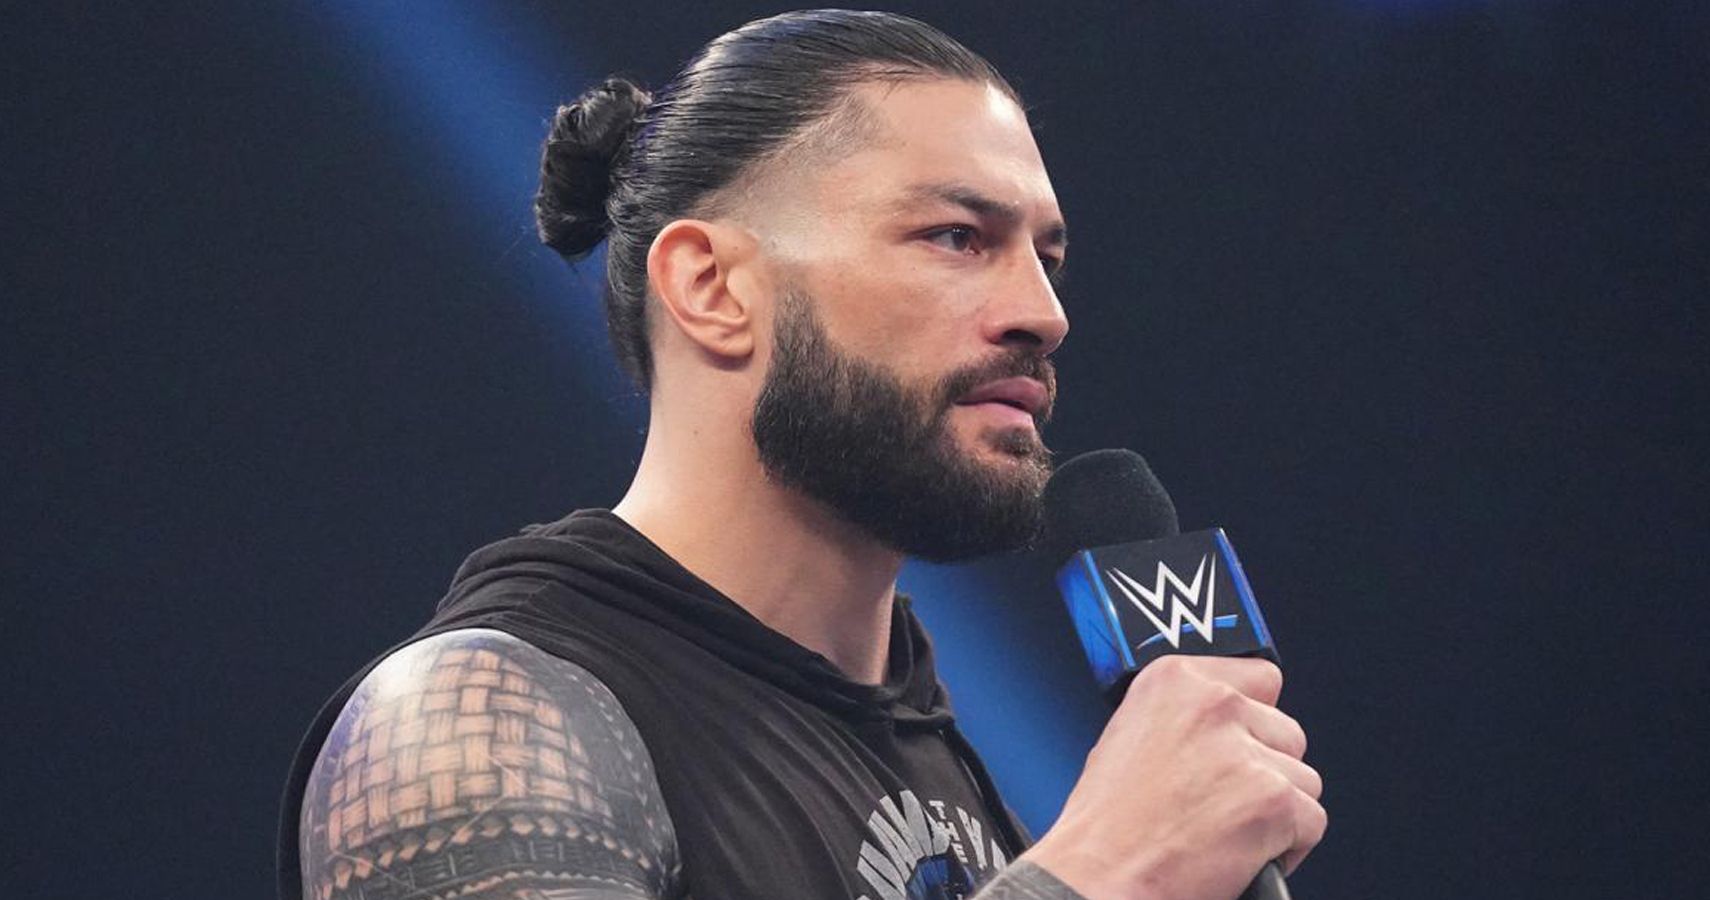 Pin by Roman Reigns on Roman Reigns best pic | Roman reigns family, Roman  reigns, Wwe superstar roman reigns